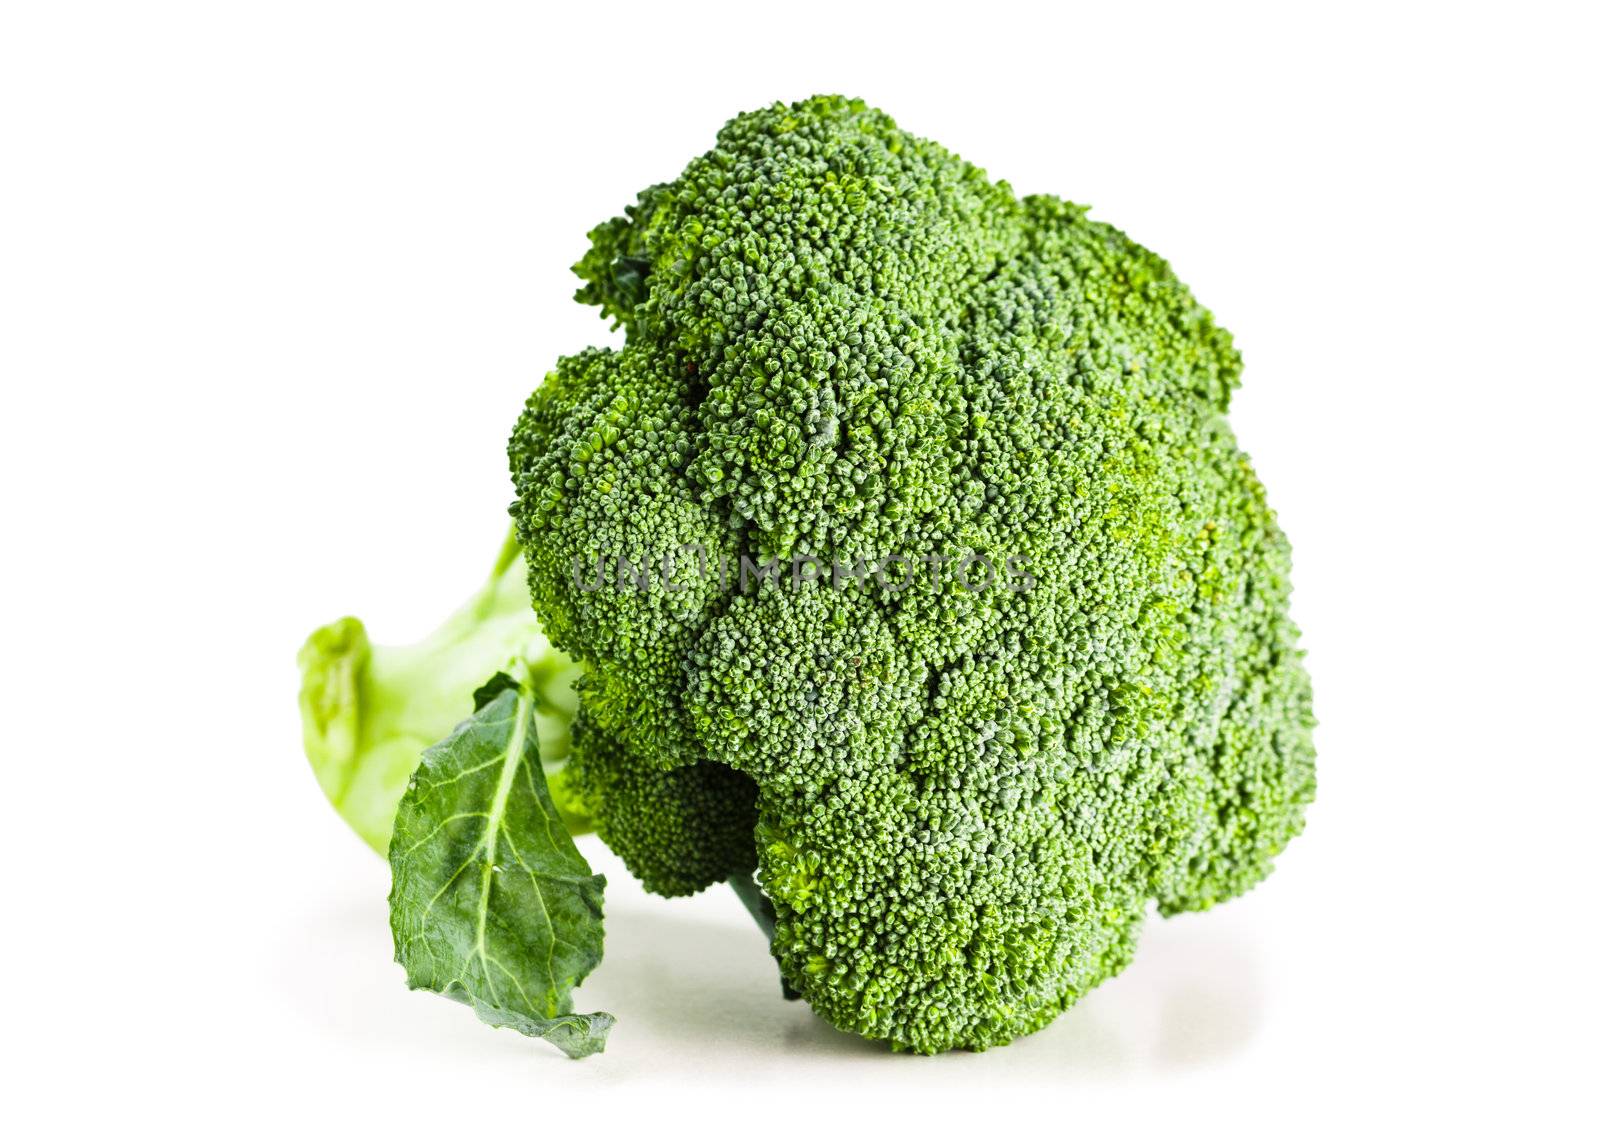 A large fresh organic broccoli head. Isolated on white